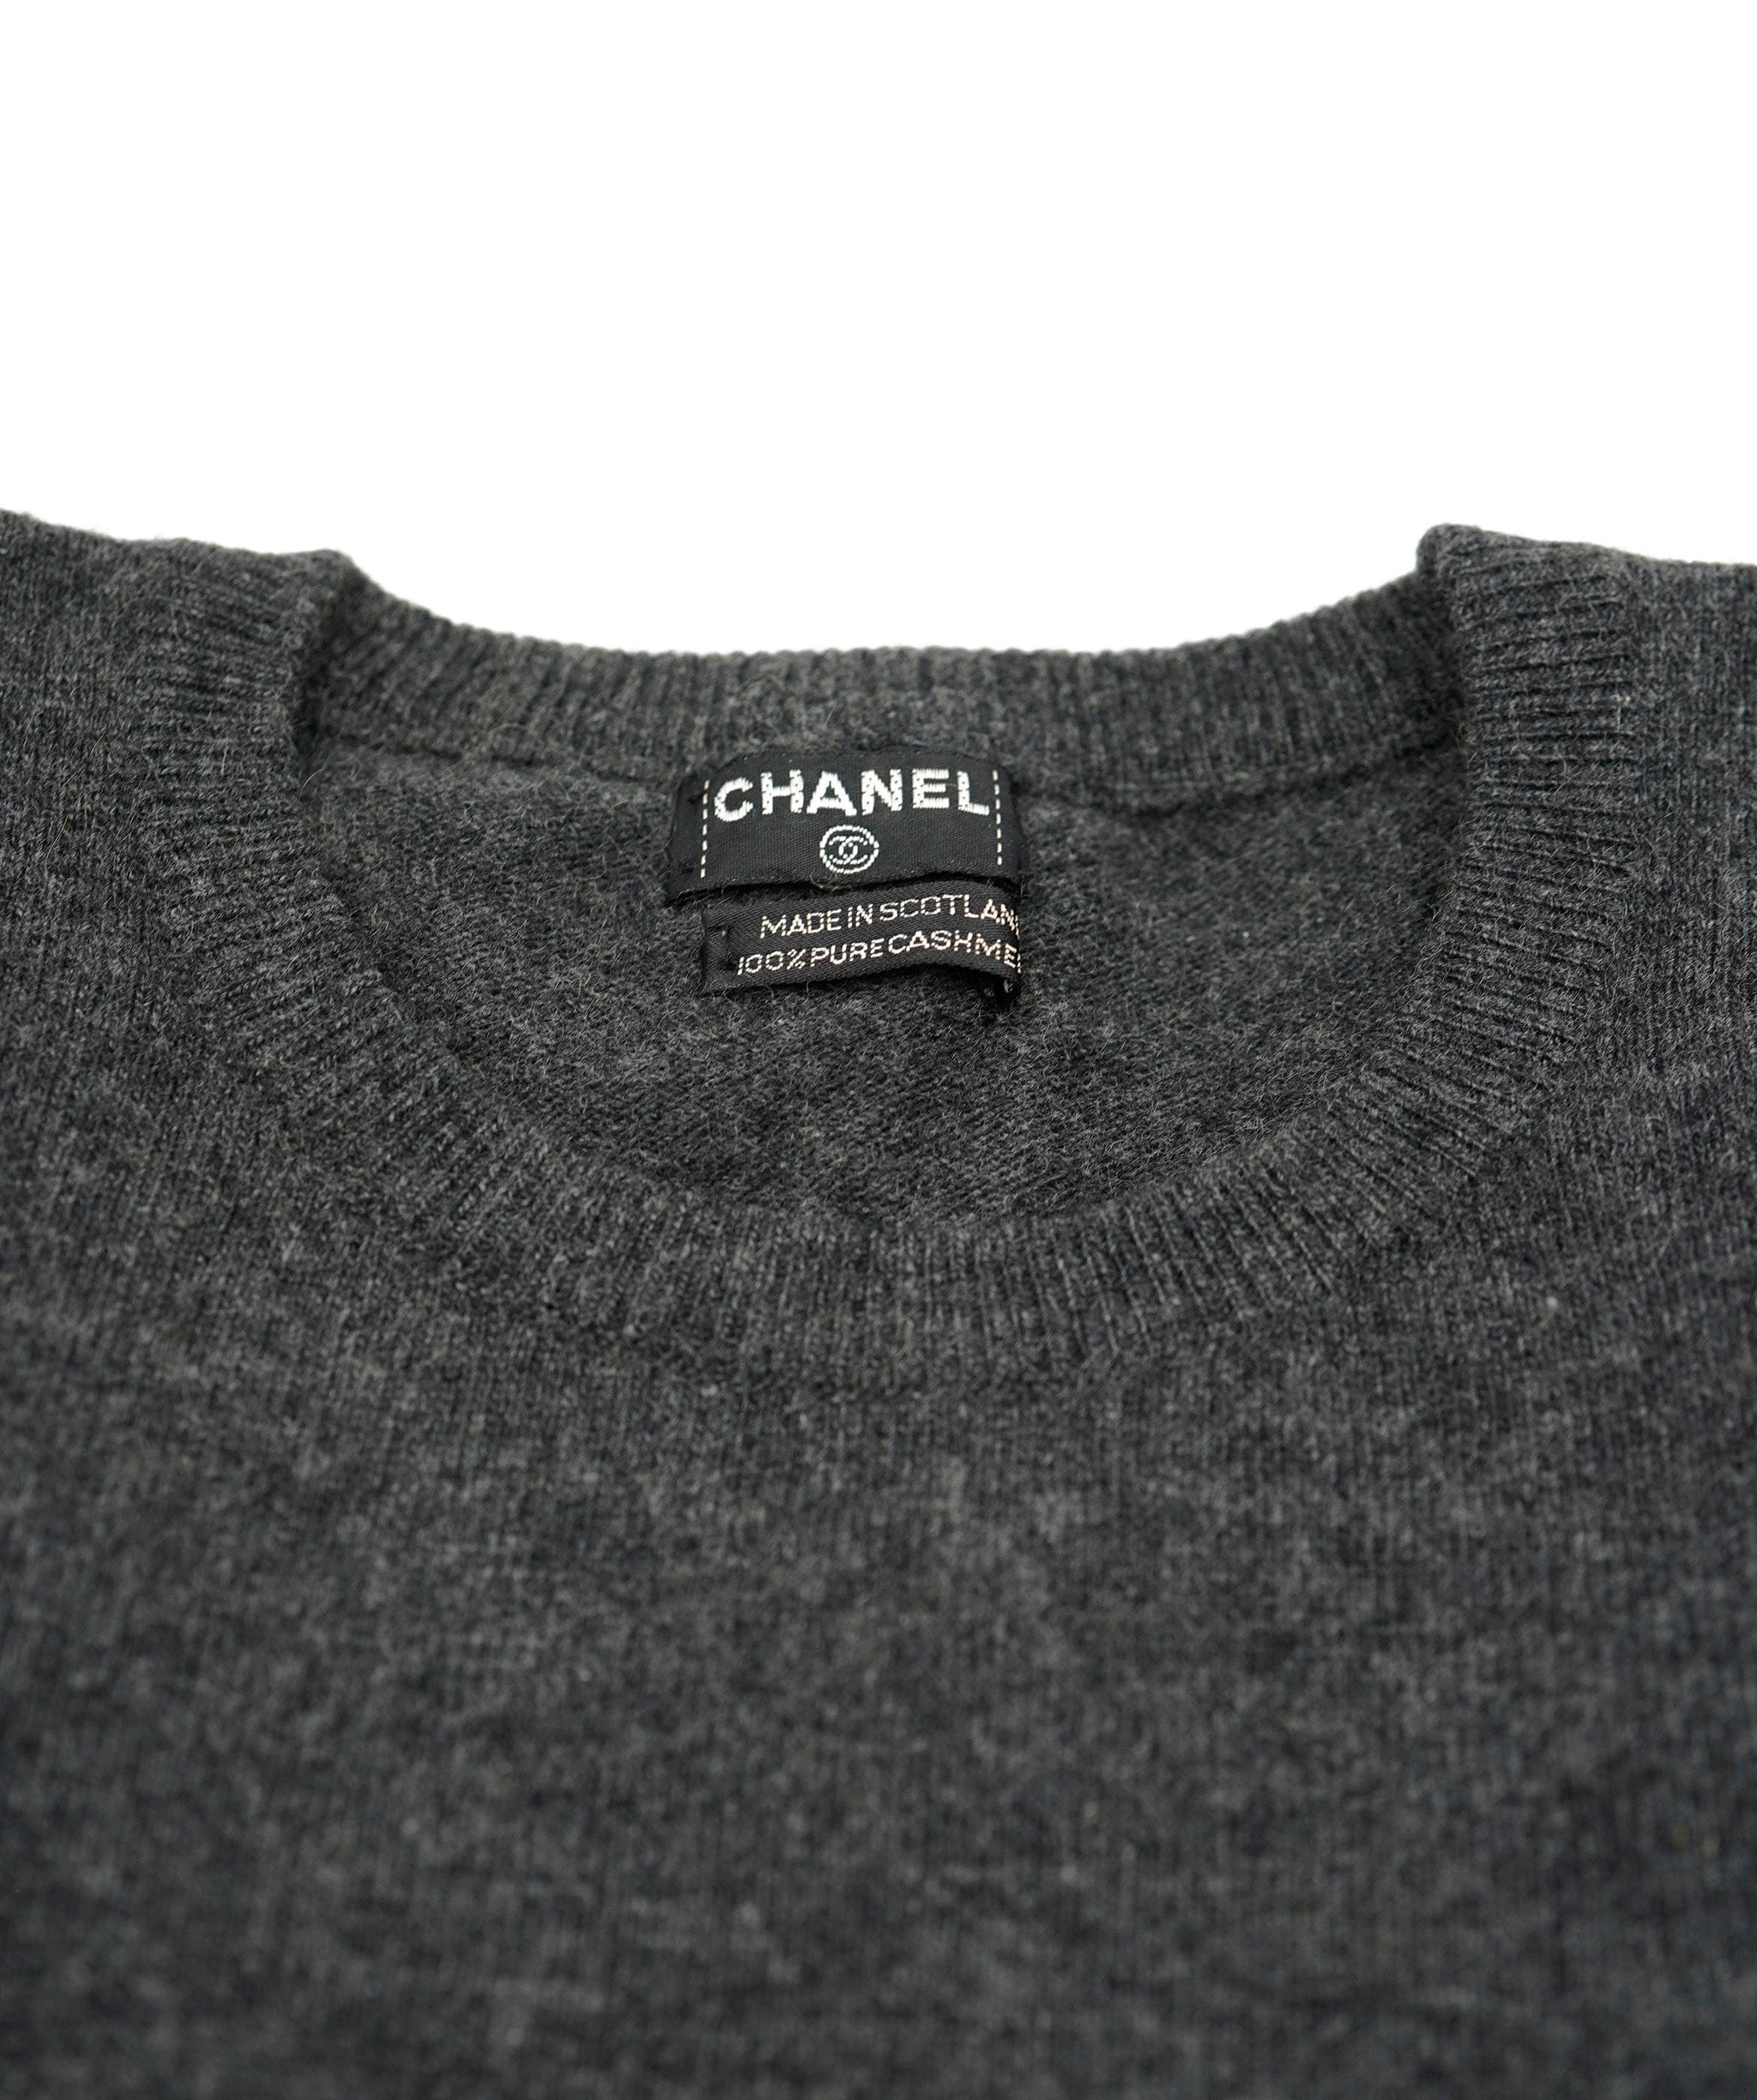 Chanel Chanel Cashmere Sweater Long Sleeve Gray ASL5432